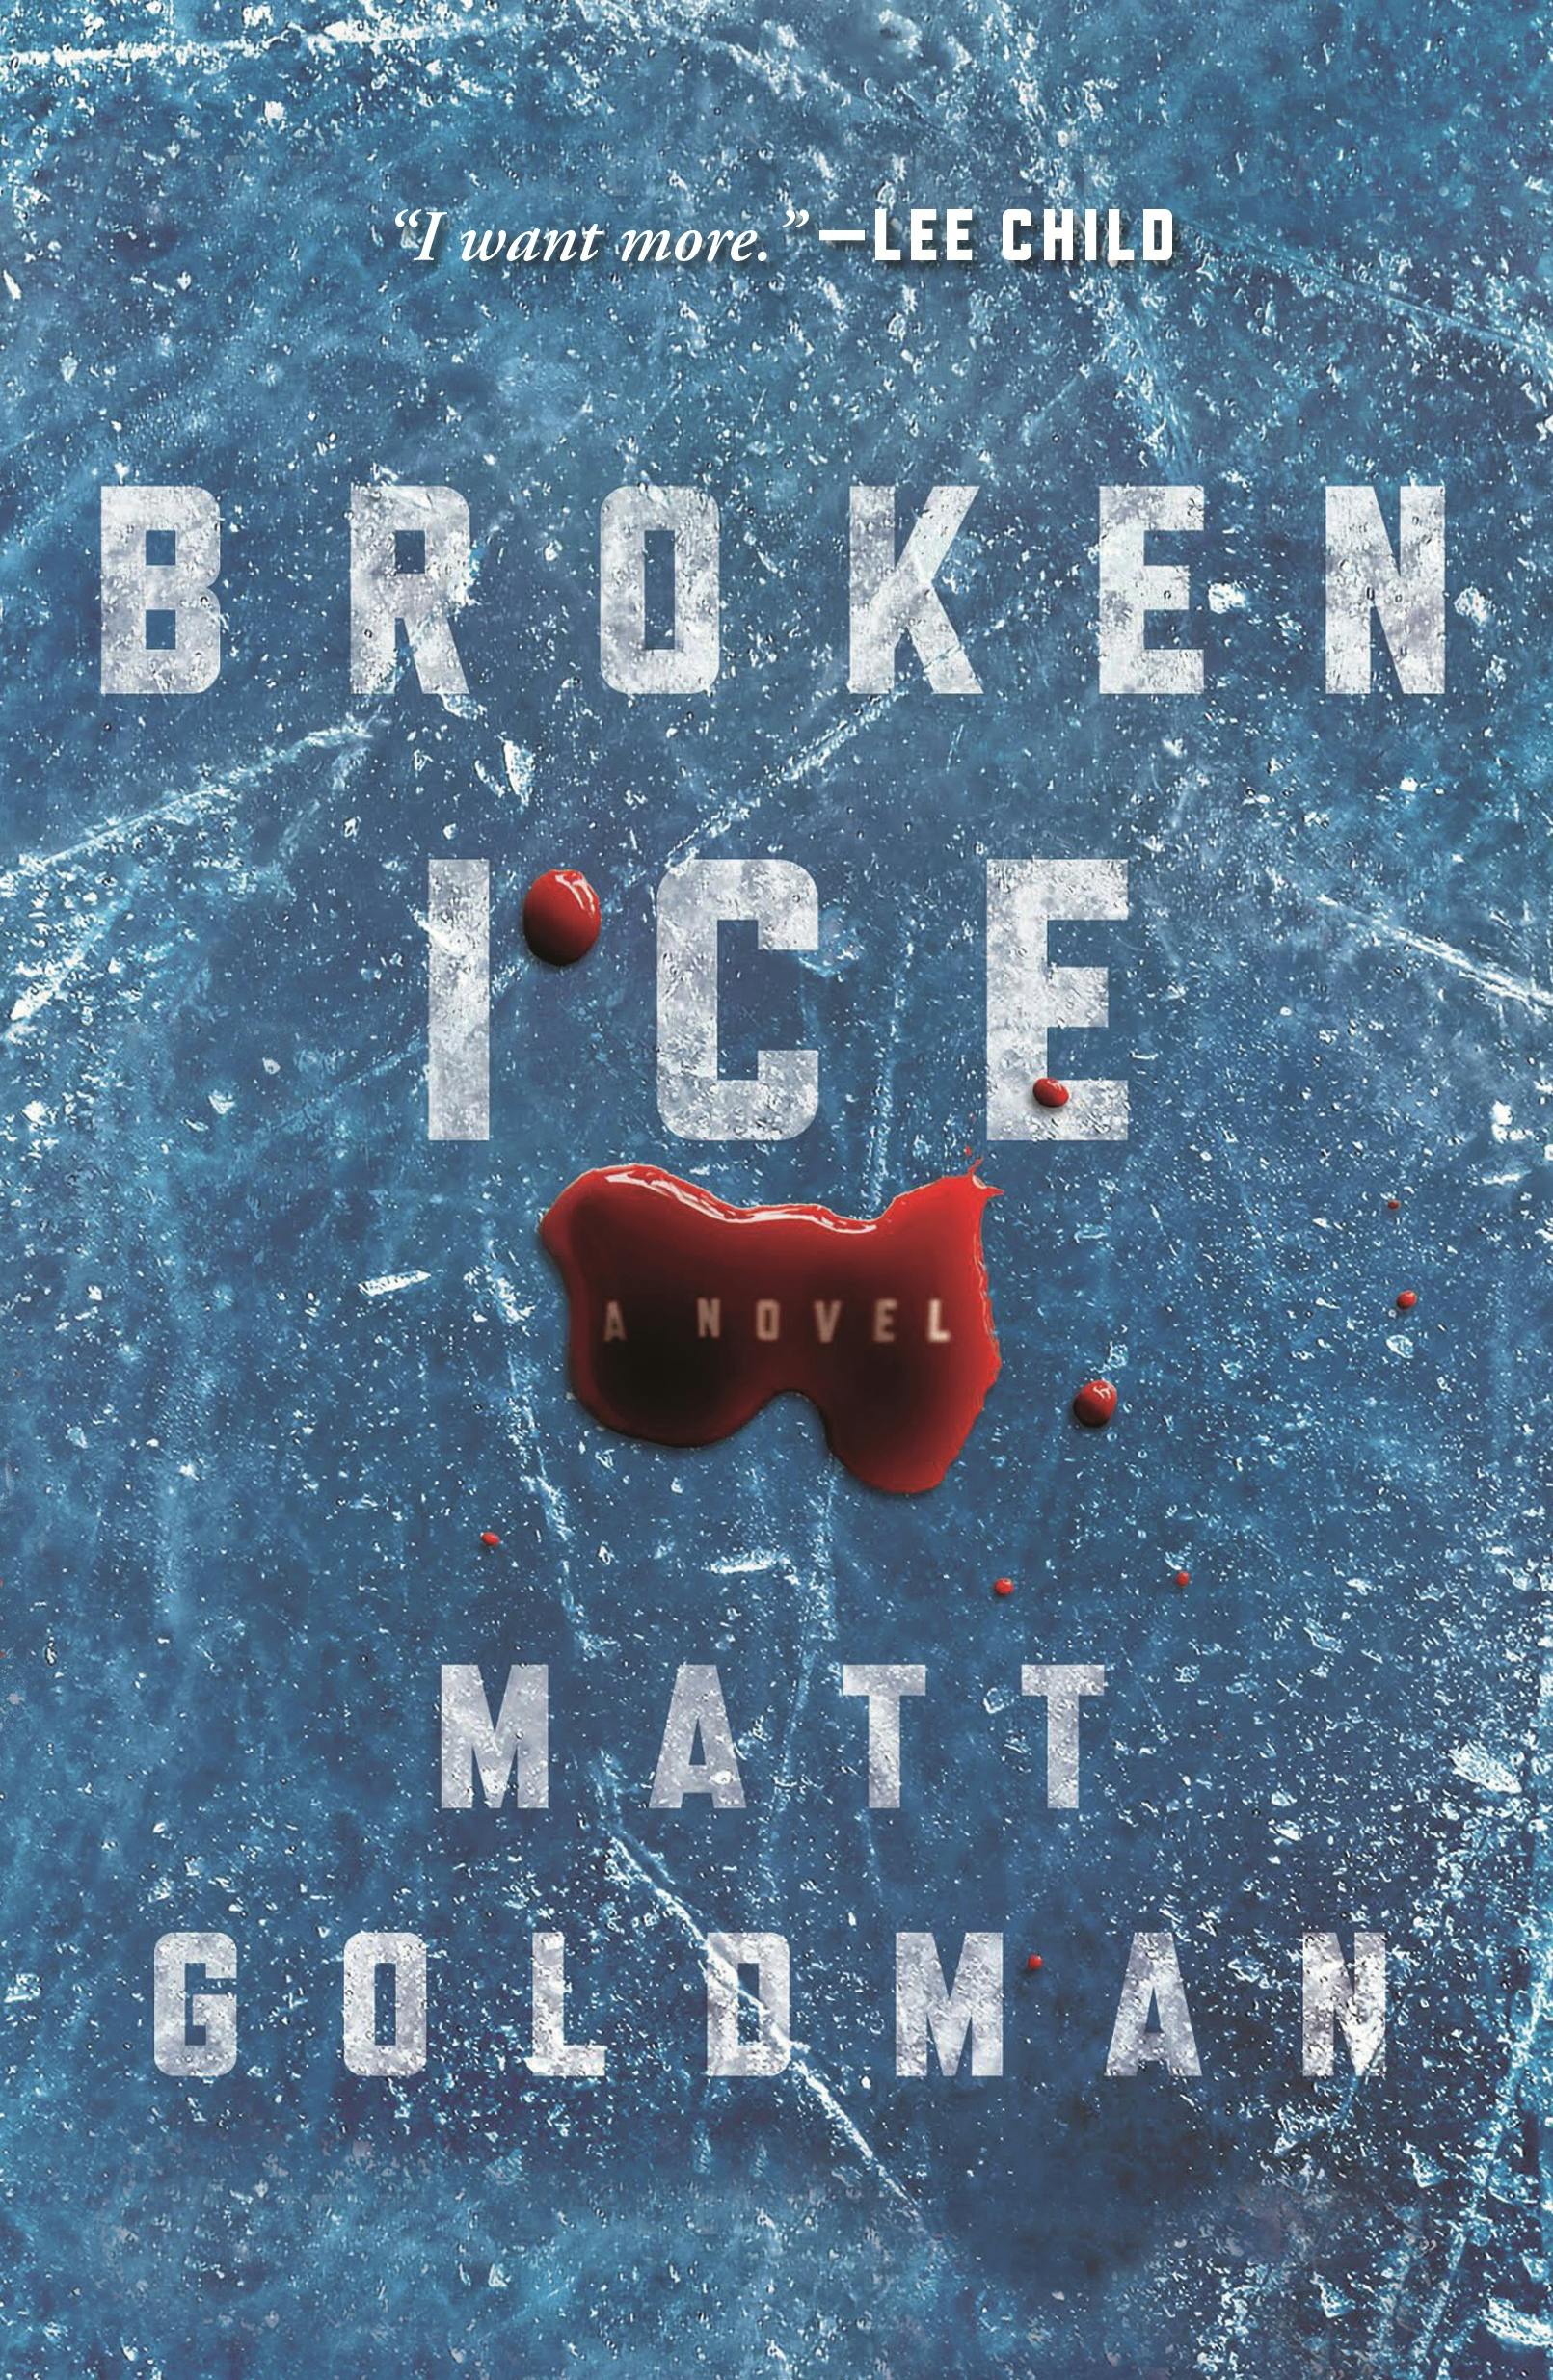 Cover for the book titled as: Broken Ice